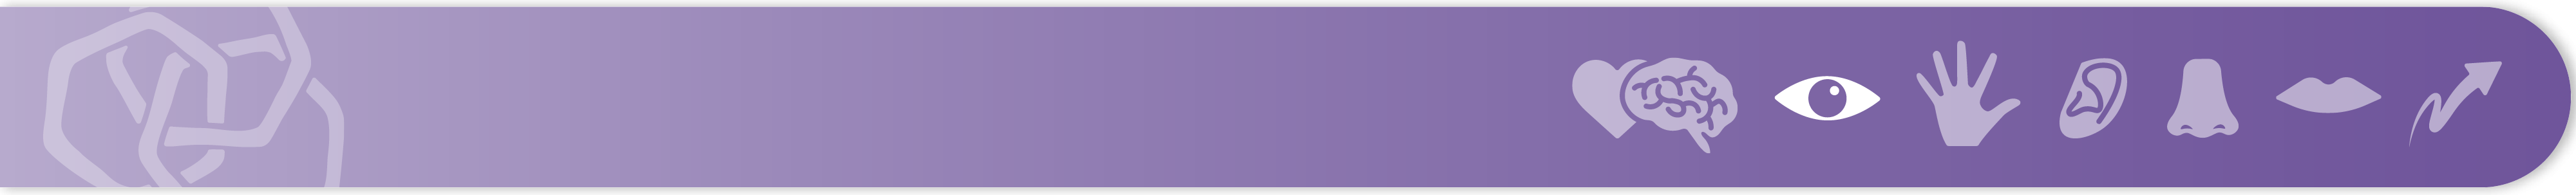 Purple banner indicating the start of a new section within the chapter. White icons are placed on top of the coloured banner.